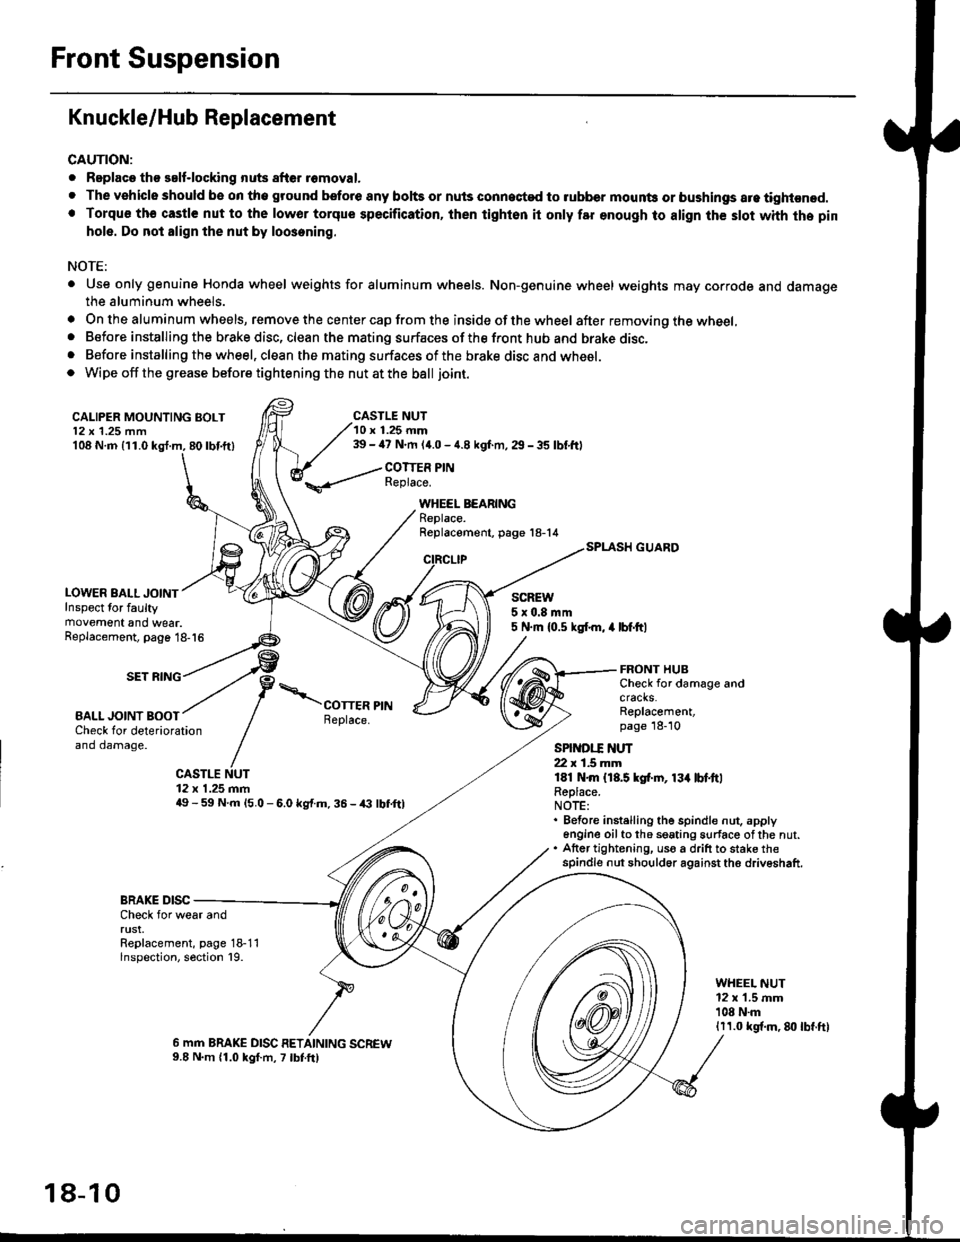 HONDA CIVIC 1996 6.G Owners Guide Front Suspension
Knuckle/Hub Replacement
CAUTION:
. Replaco tho salf-locking nuts after romoval.
. The vehiclo should be on tho ground bsfore any bohs or nuls connected to rubber mounb or bushings are